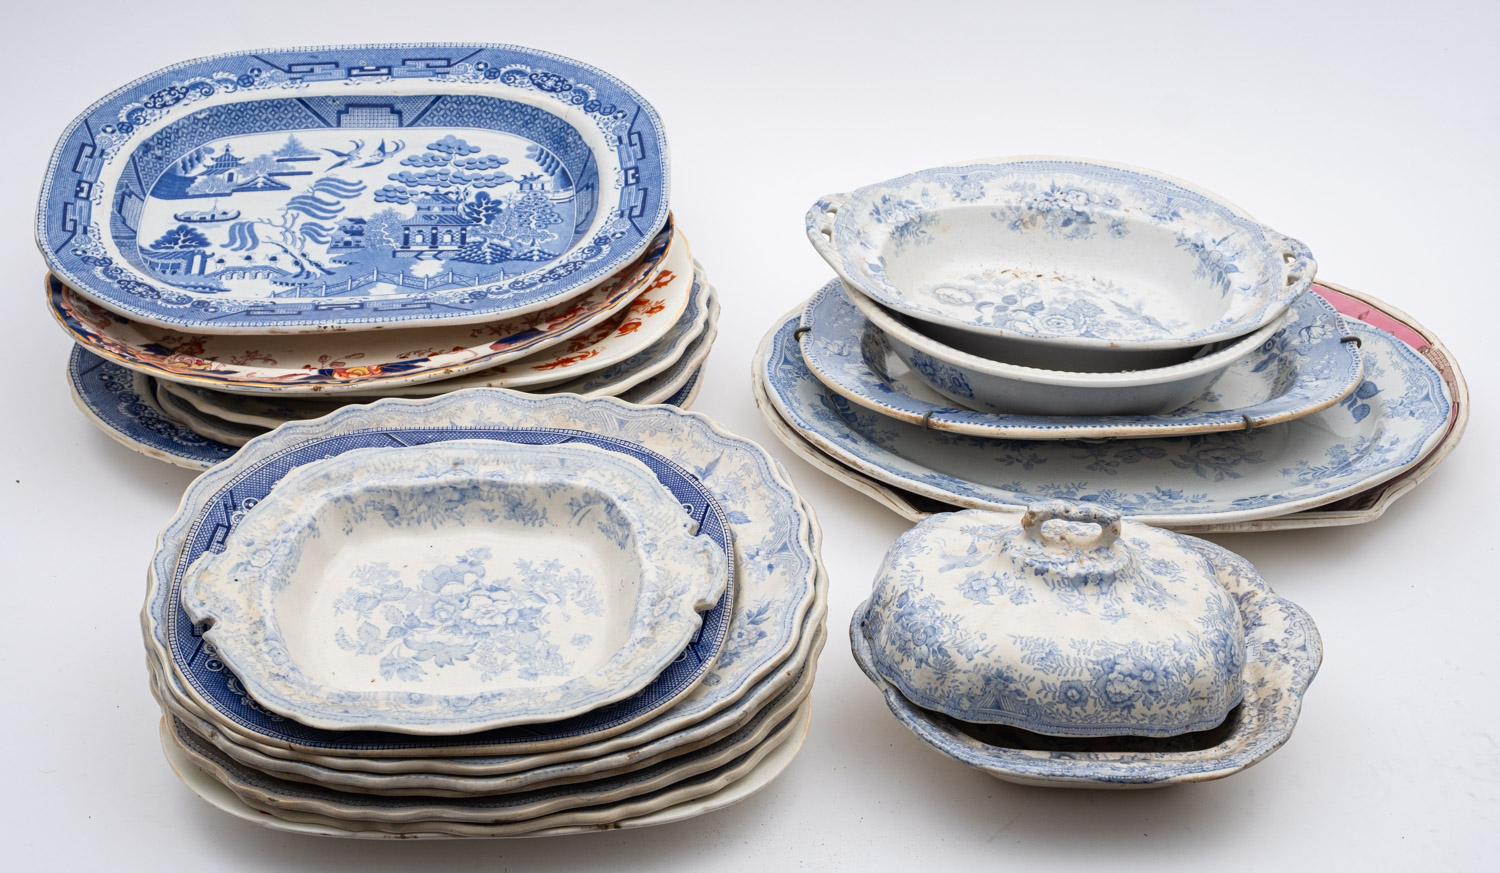 A collection of 19th century and later meat plates and tableware, various makers and patterns.